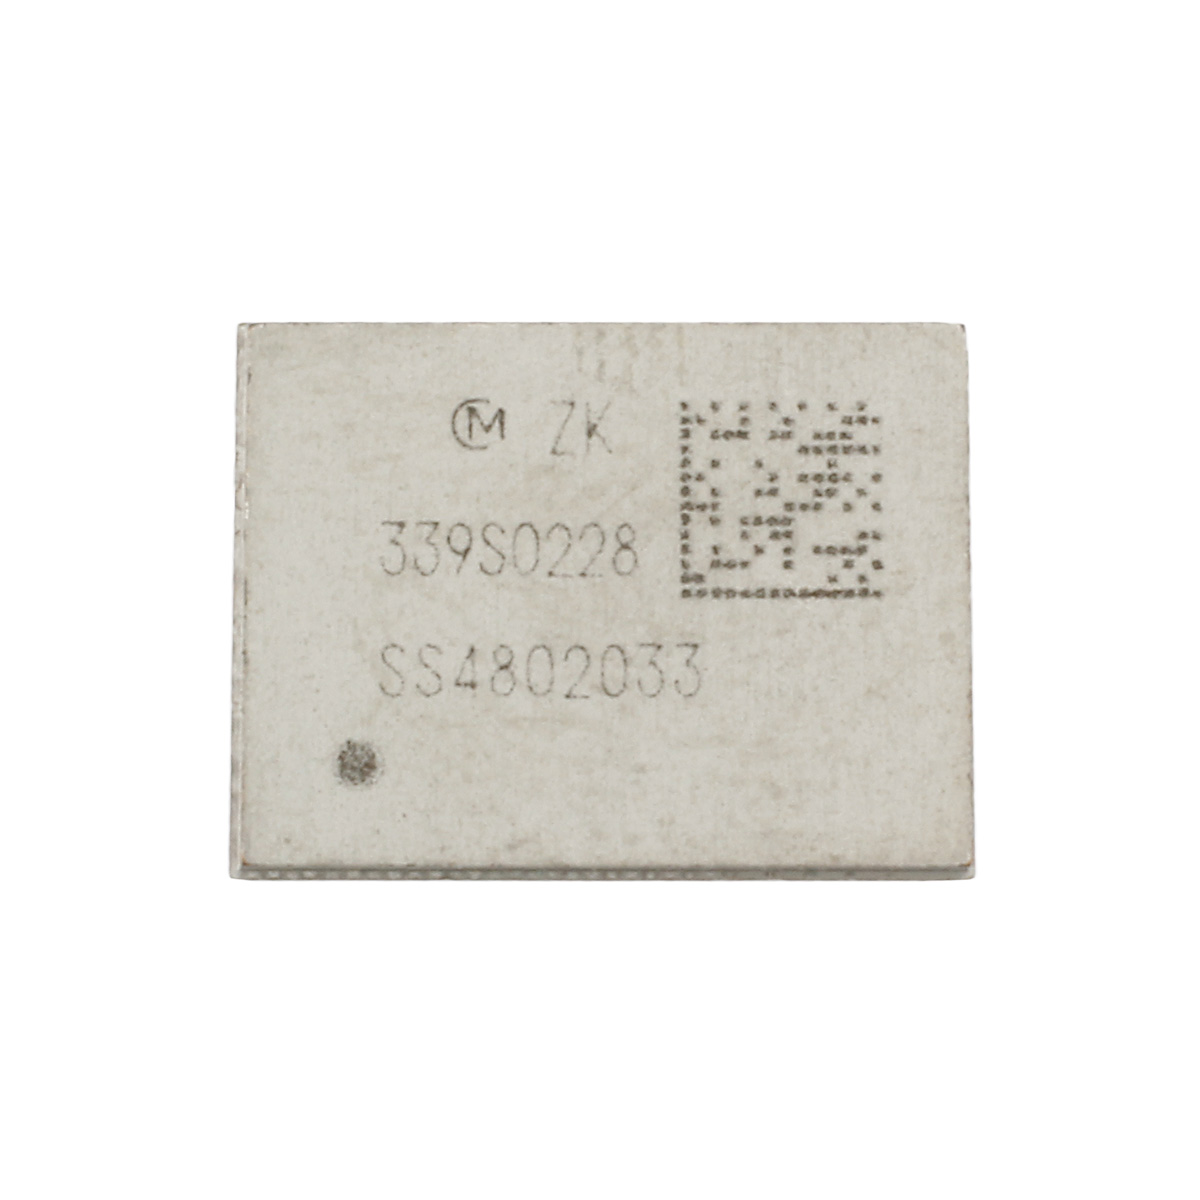 IC Chip RF WiFi 339S0228 Compatible with iPhone 6 Plus